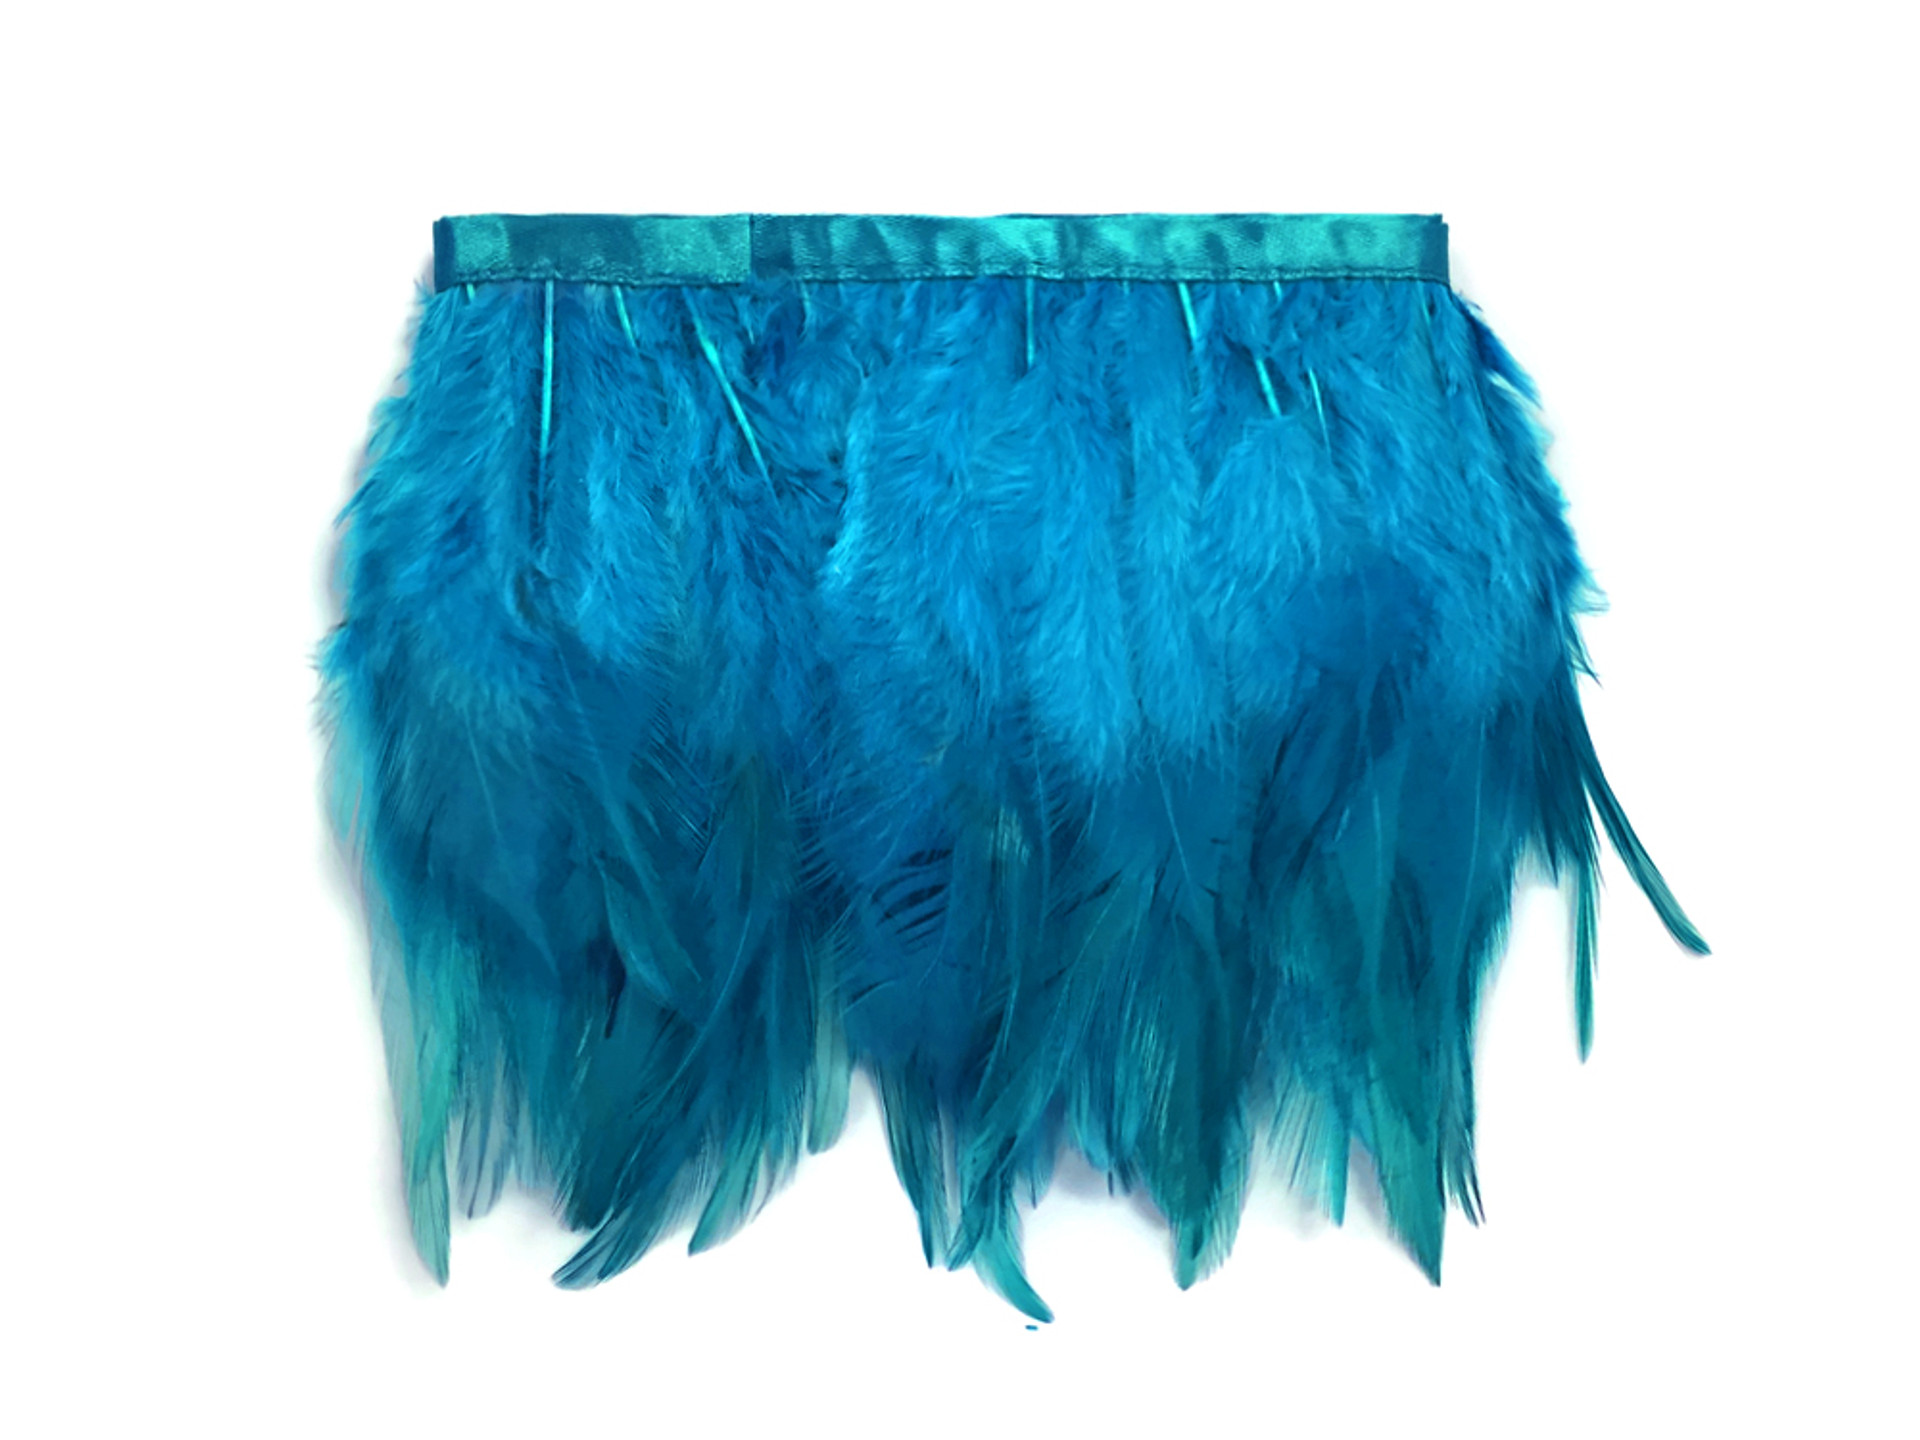 1 Yard - BLUE Rooster Neck Hackle Feather Trim | Moonlight Feather